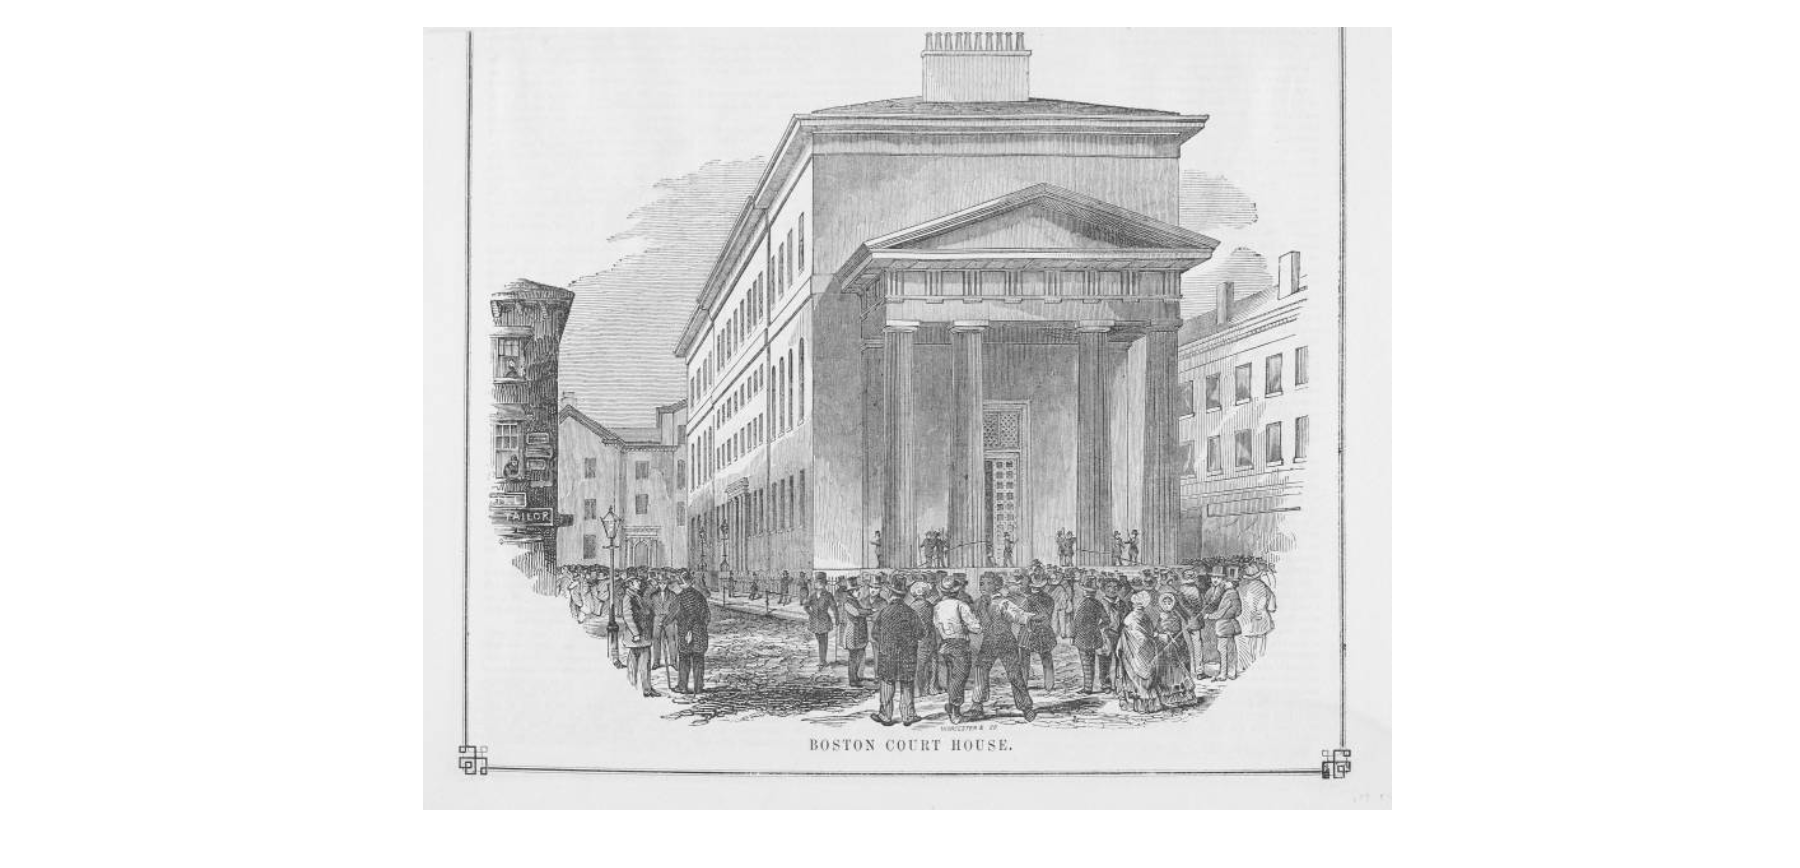 Sketch of the Boston Court House, with crowds of people outside.